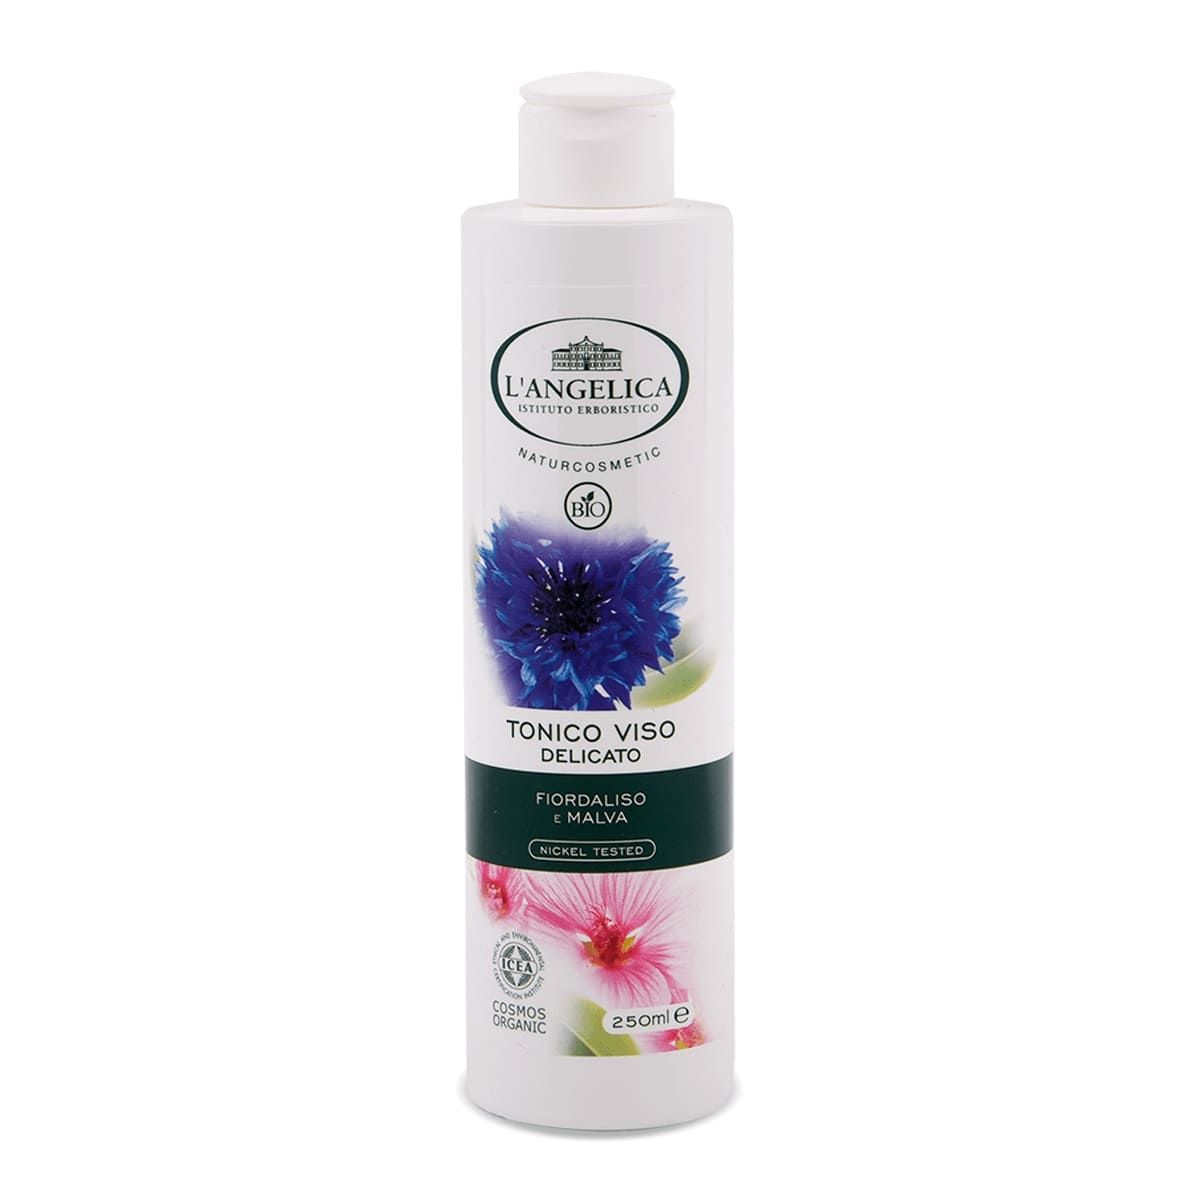 Cornflower and Mallow Delicate Face Tonic